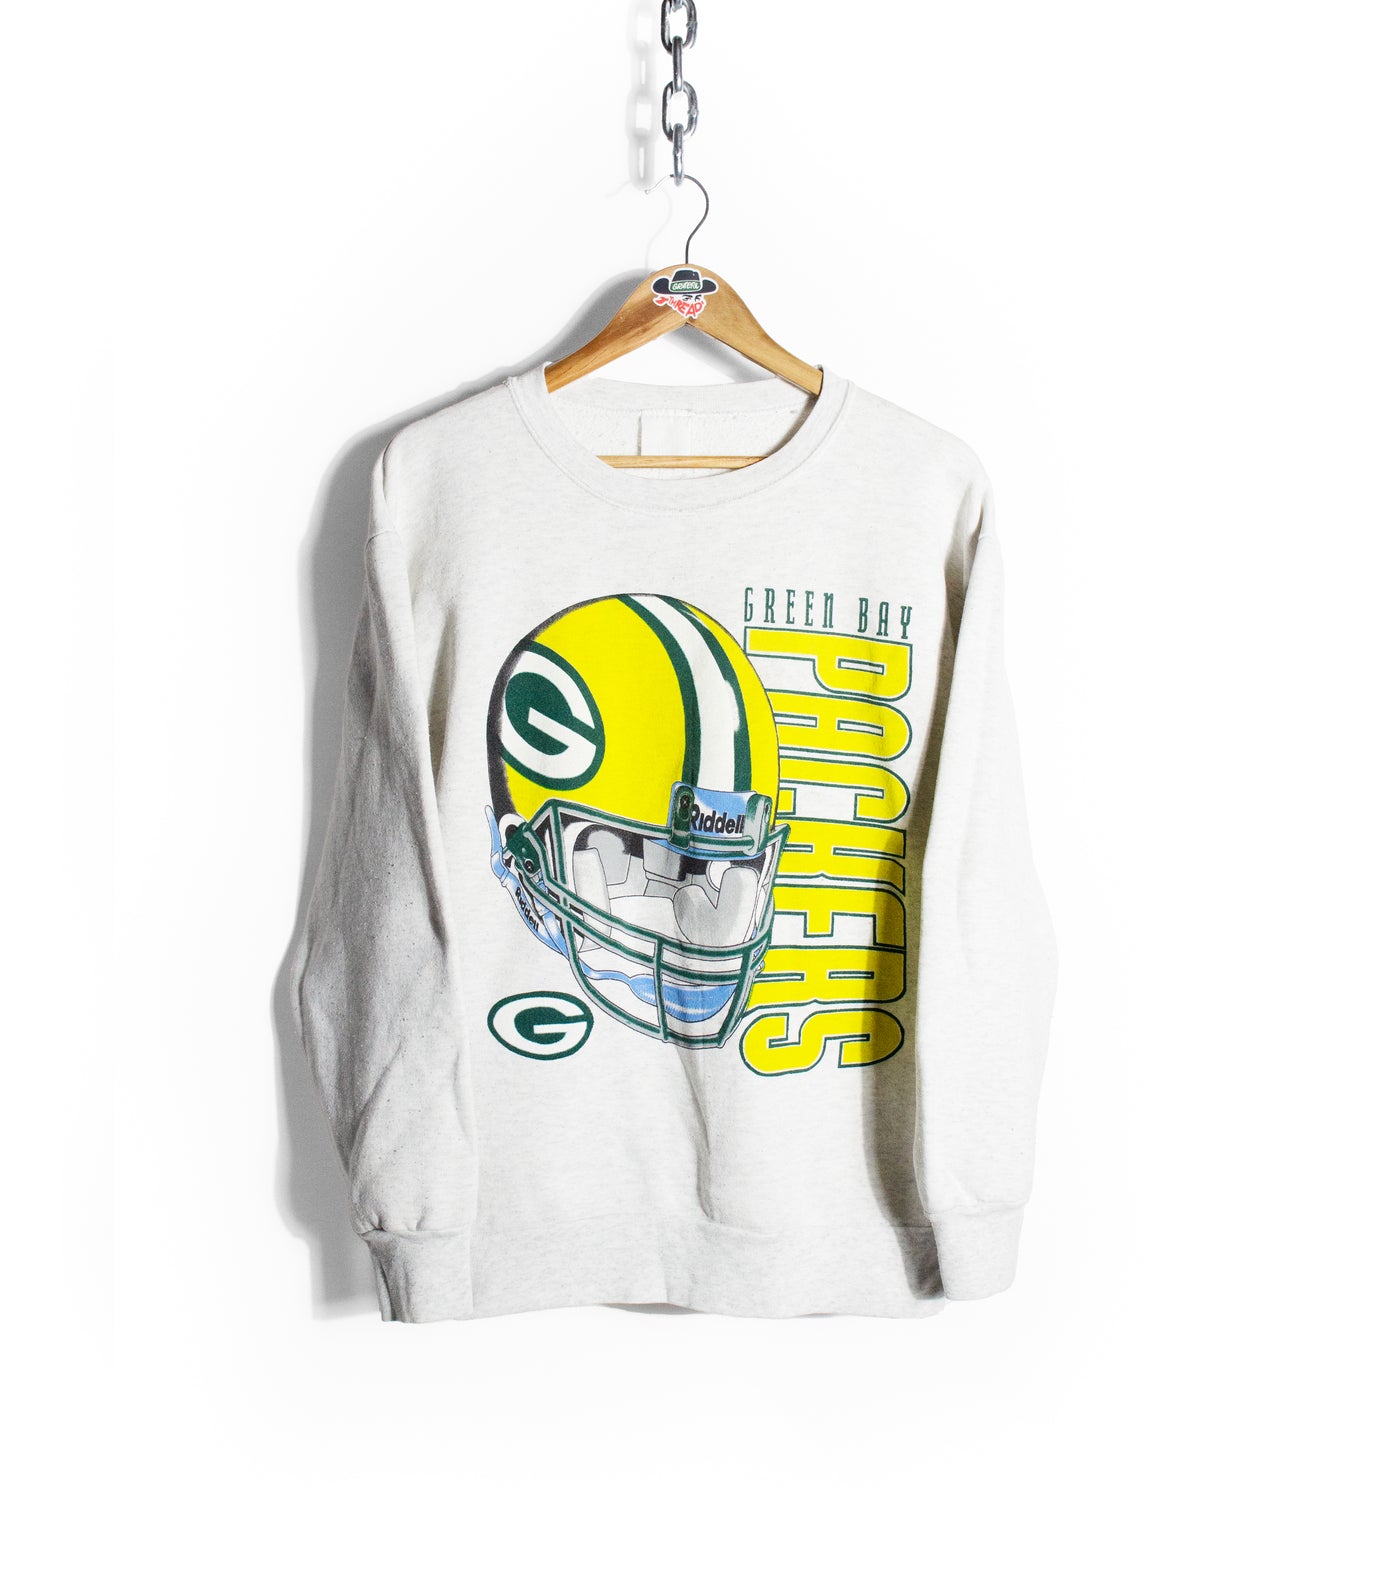 Vintage 90s Riddell Green Bay Packers Graphic Crewneck